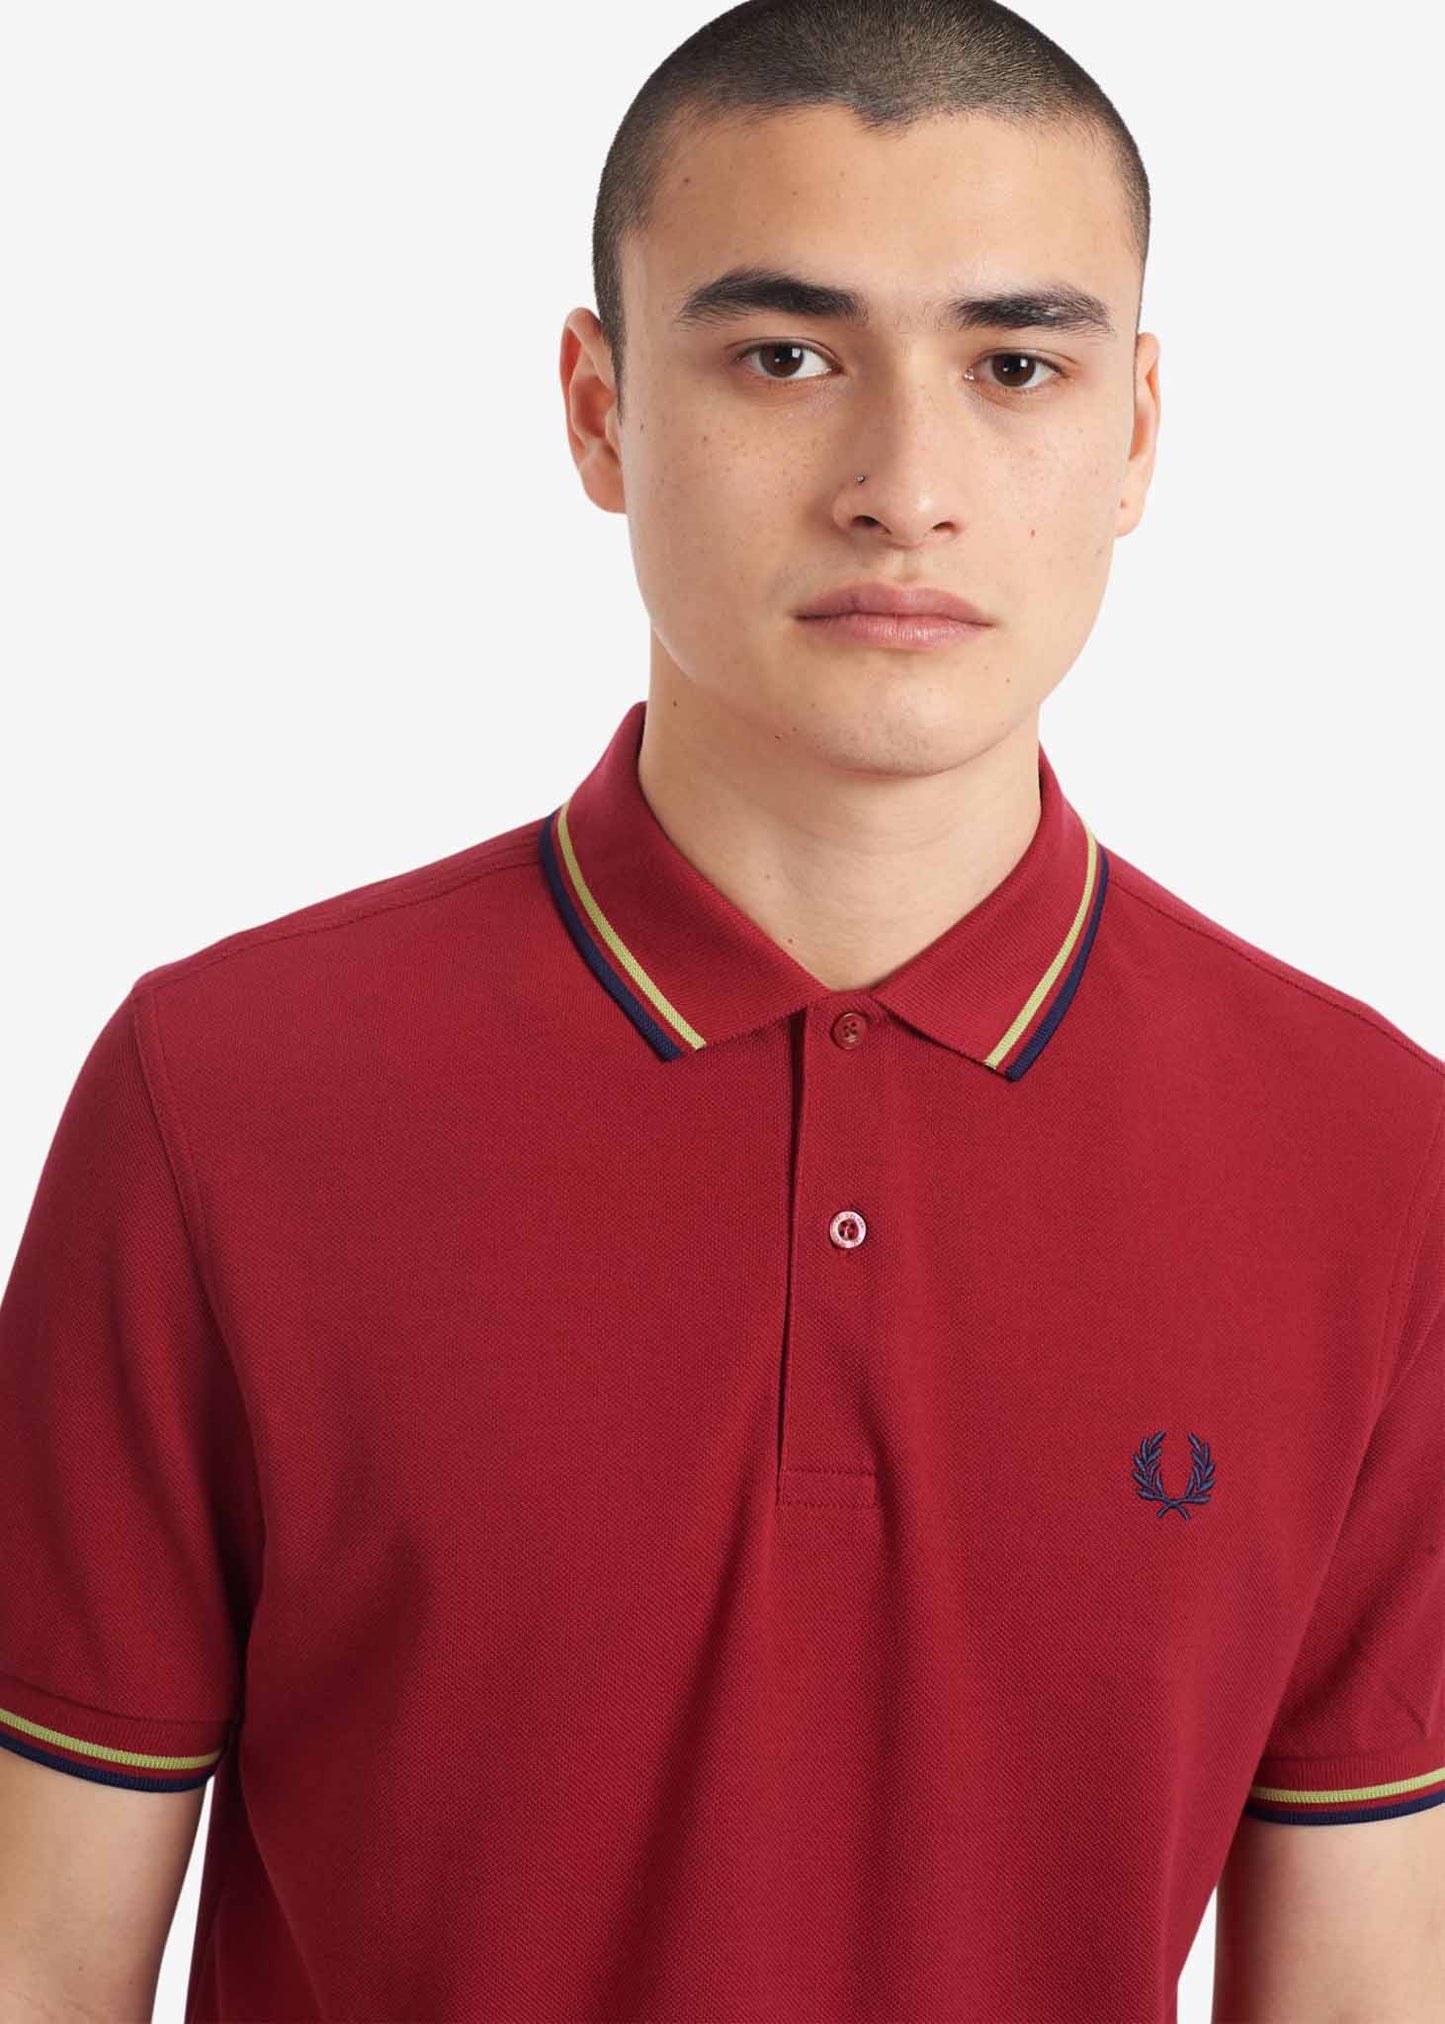 Twin tipped fred perry shirt - claret french navy